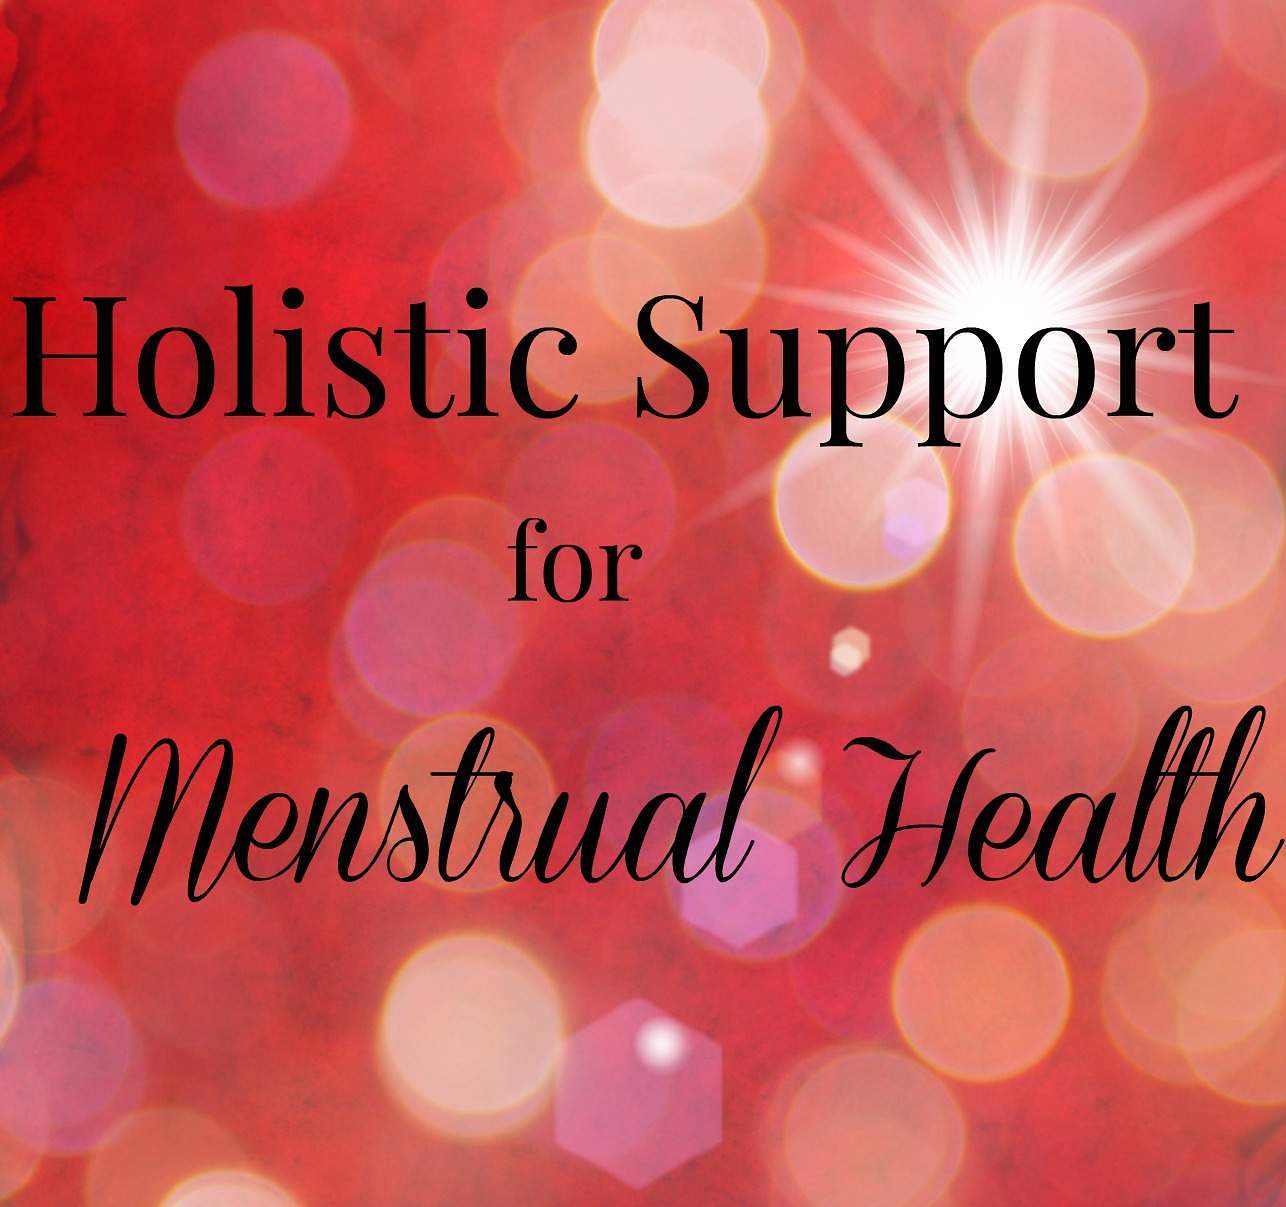 Holistic Support for Menstrual Health